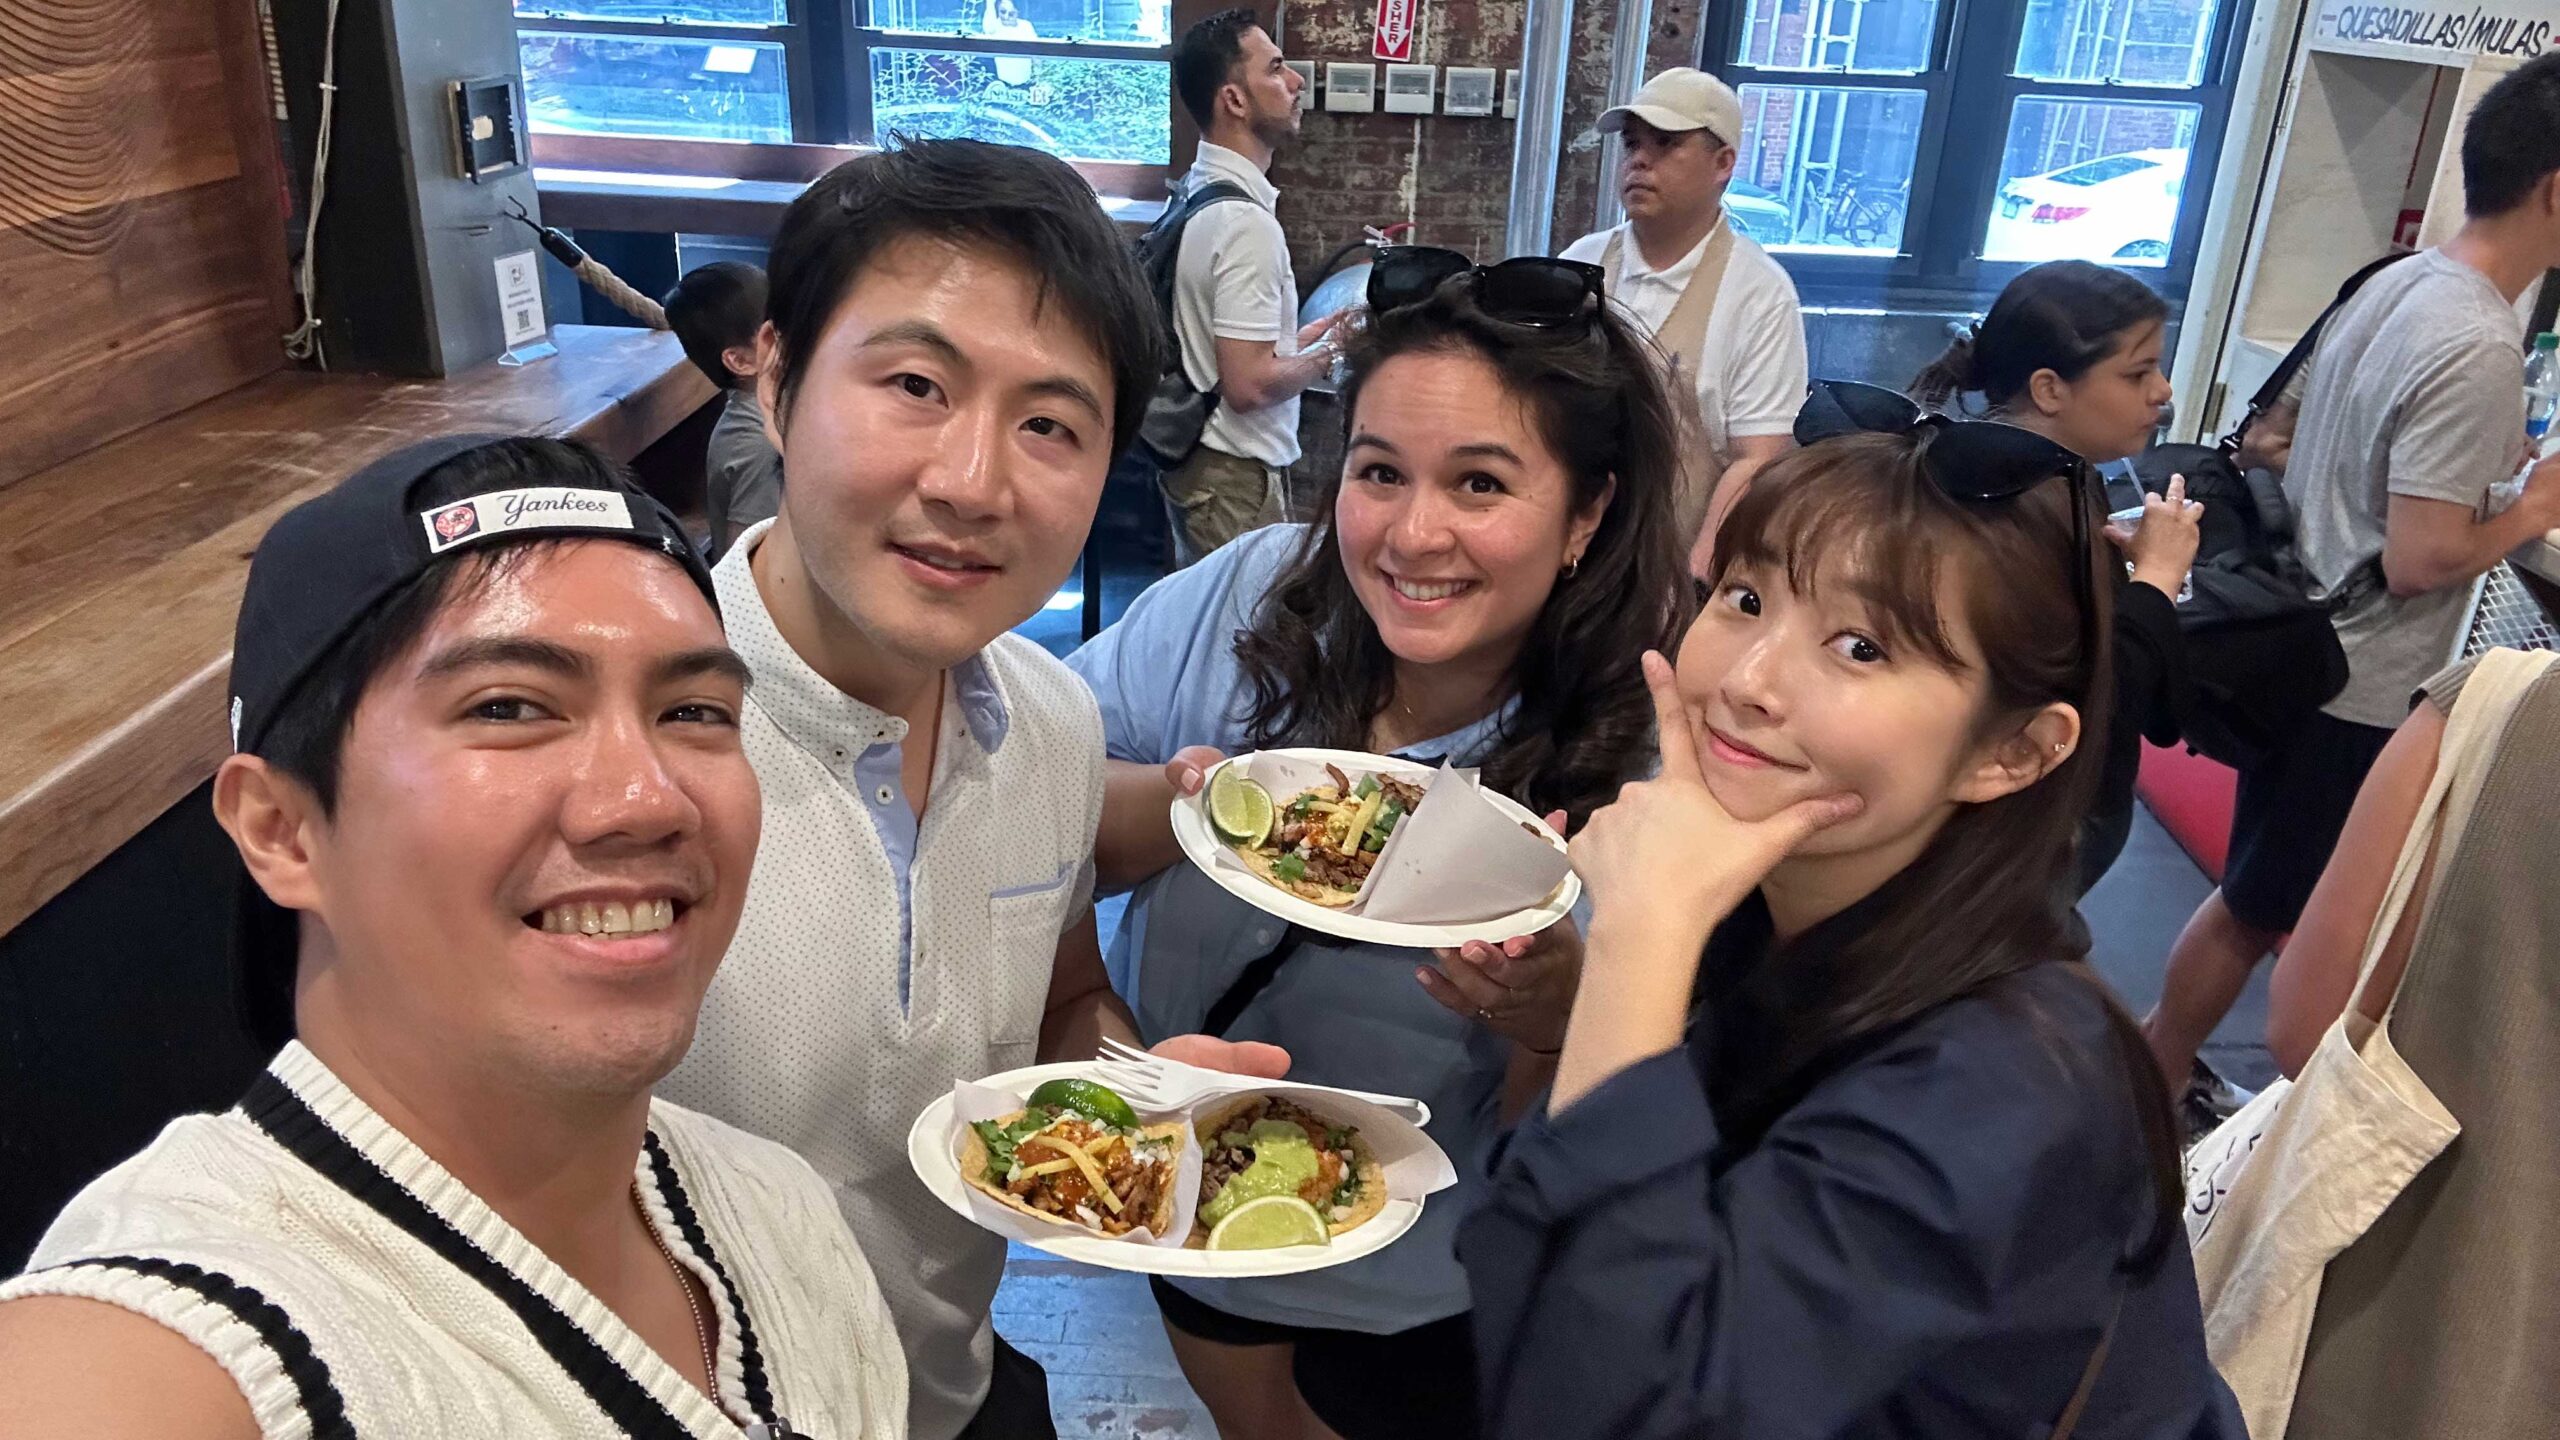 4 friends eating tacos in chelsea market